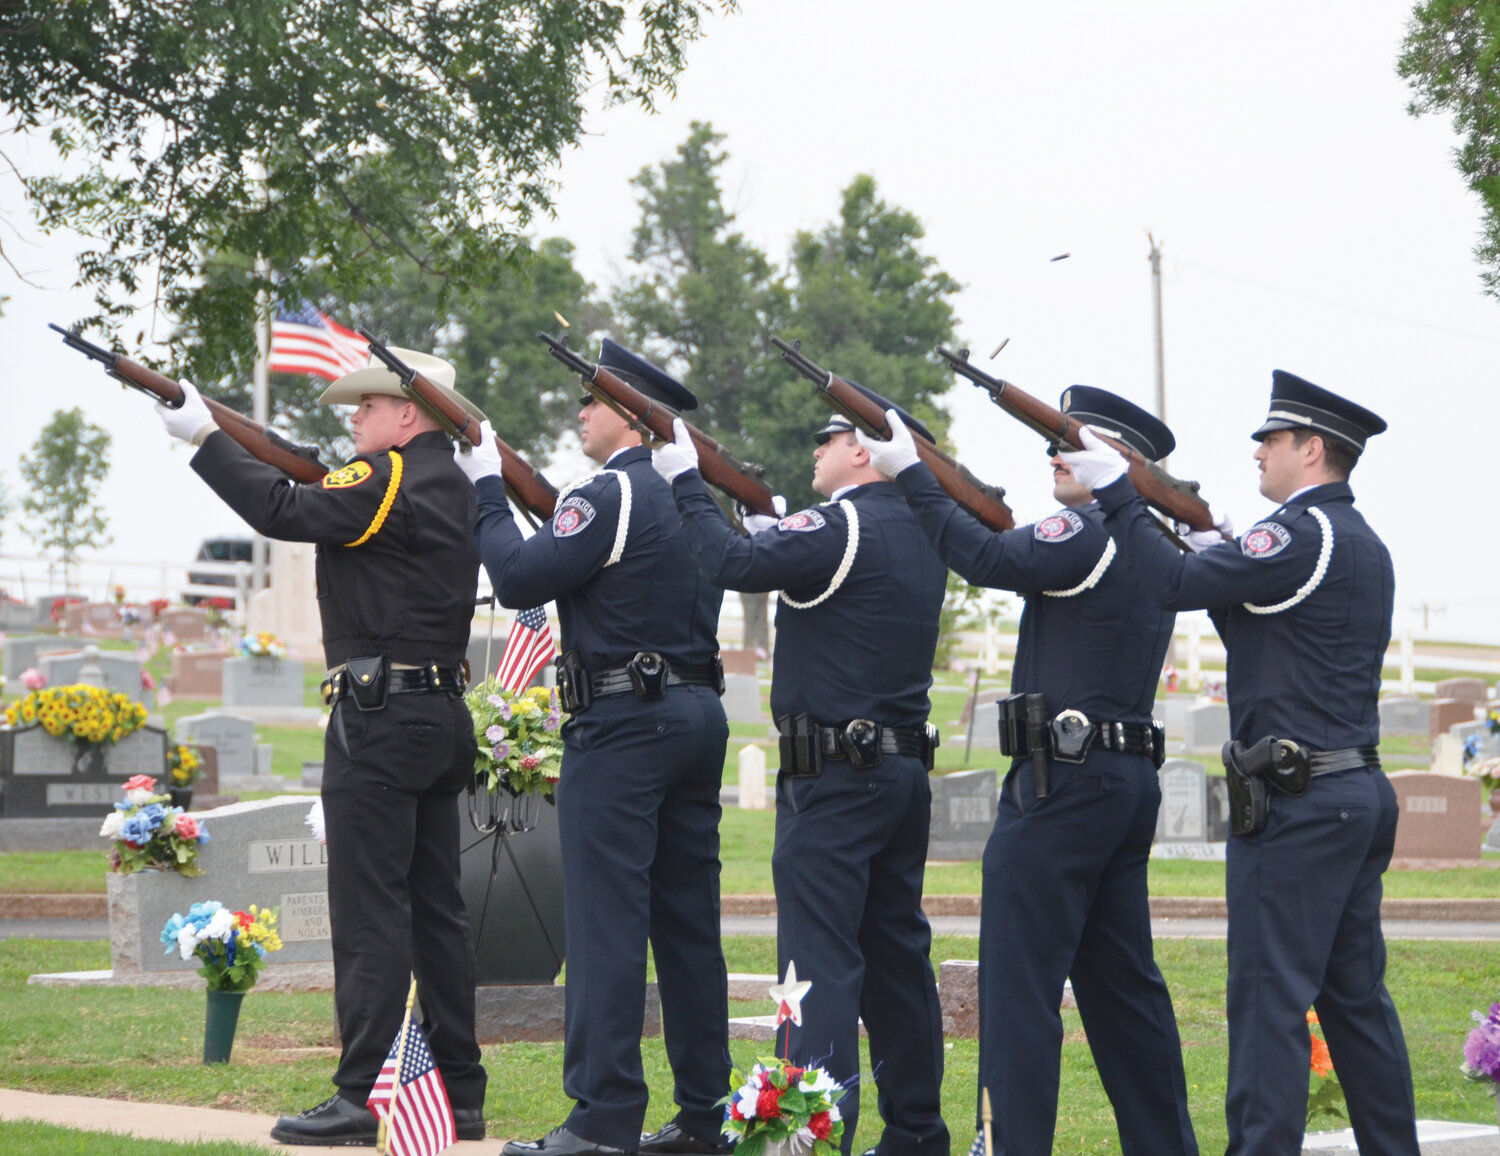 A combined honor guard from the McClain County Sheriff’s Department and Purcell Police fired off a salute at the annual Memorial Day Ceremony at Hillside Cemetery last Monday. Taking part in the salute were Sheriff Deputy Justin Rowe, Det. Brayden Bulliver and officers Kyle Mobley, Jerry Pittman and Daniel Fumi.